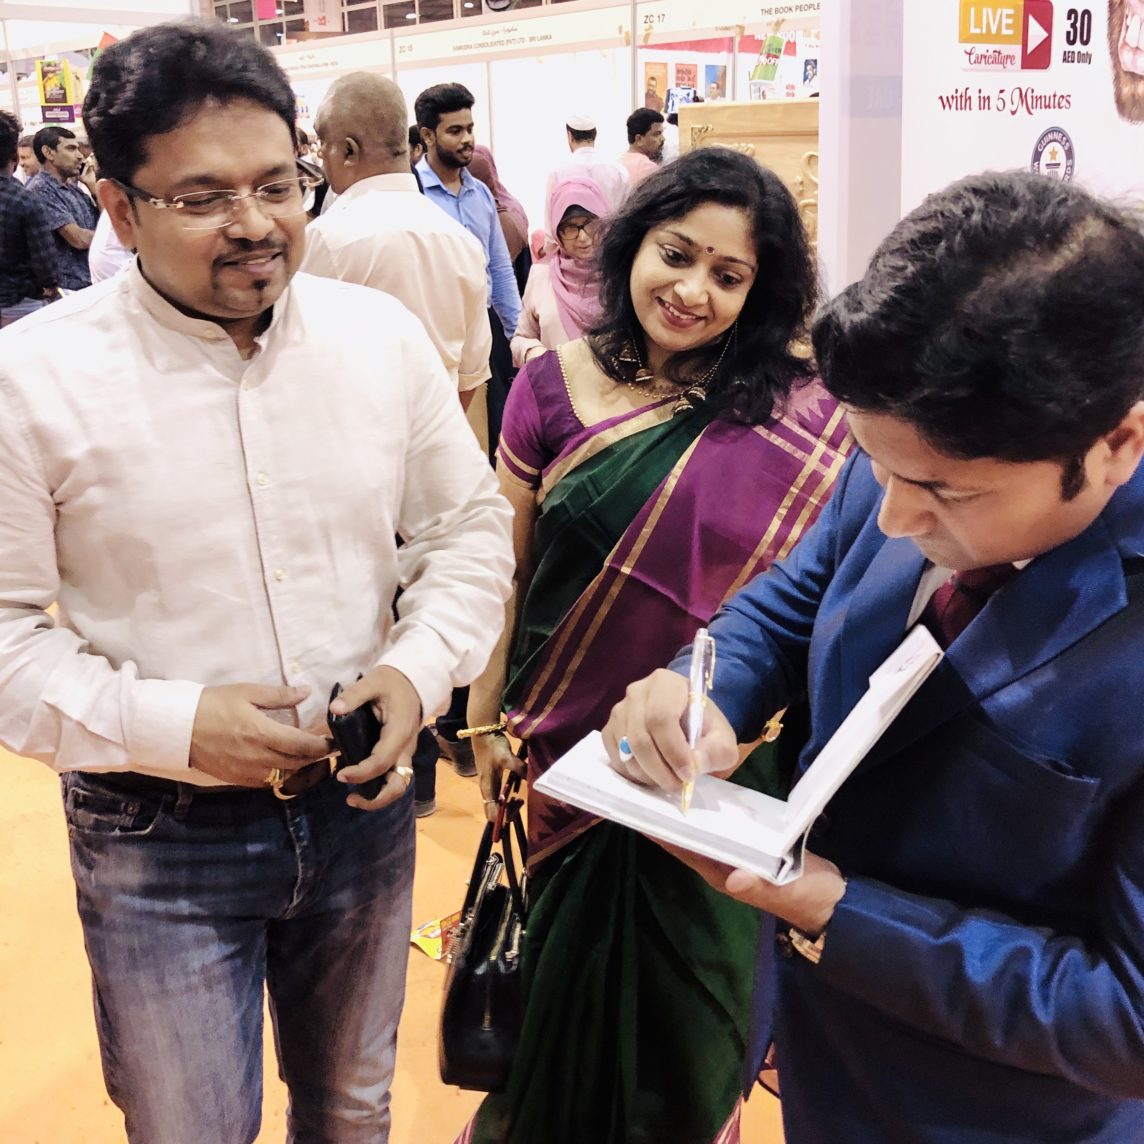 Book signing for Syam Panicker